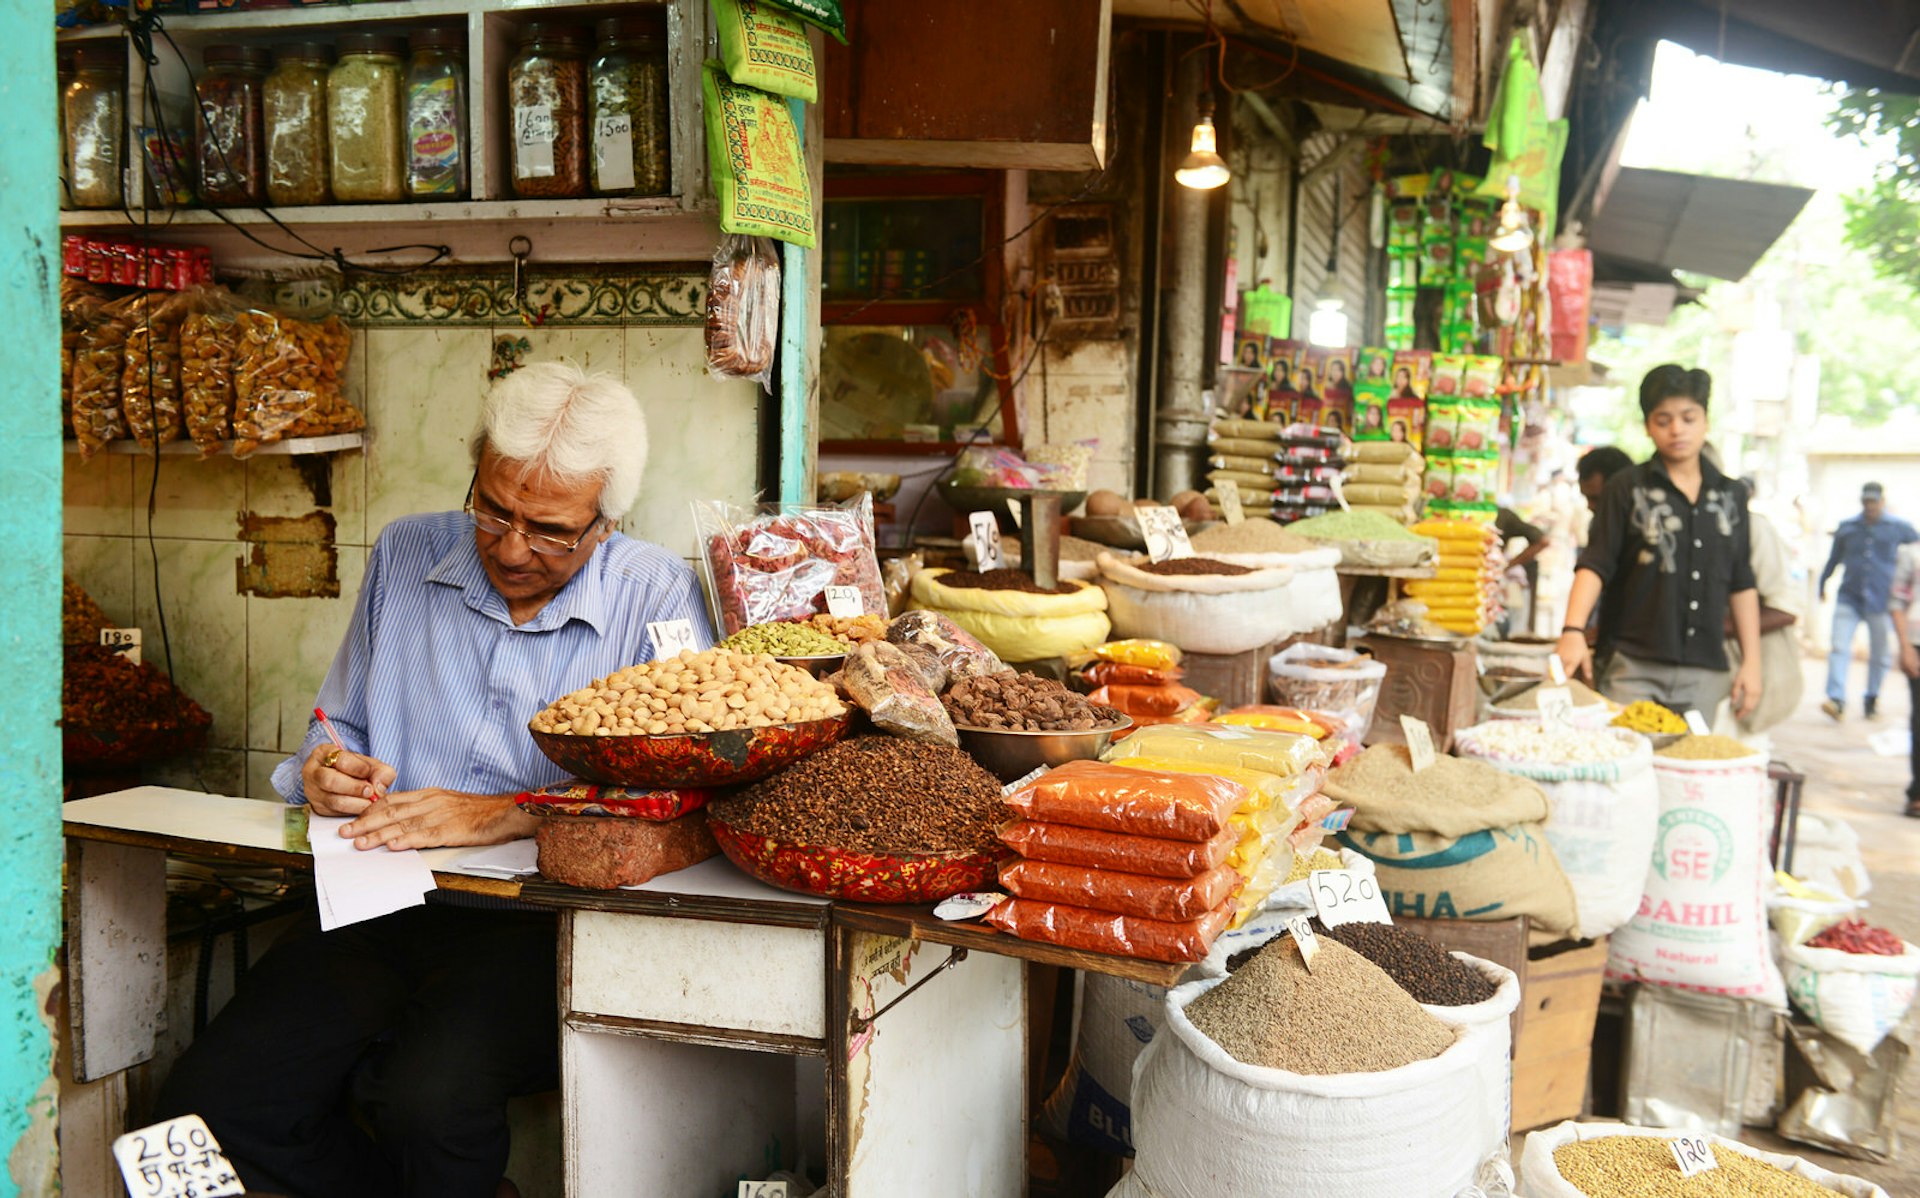 Get a belly full of spiced treats in Delhi © Ramesh Pathania/Mint / Getty Images